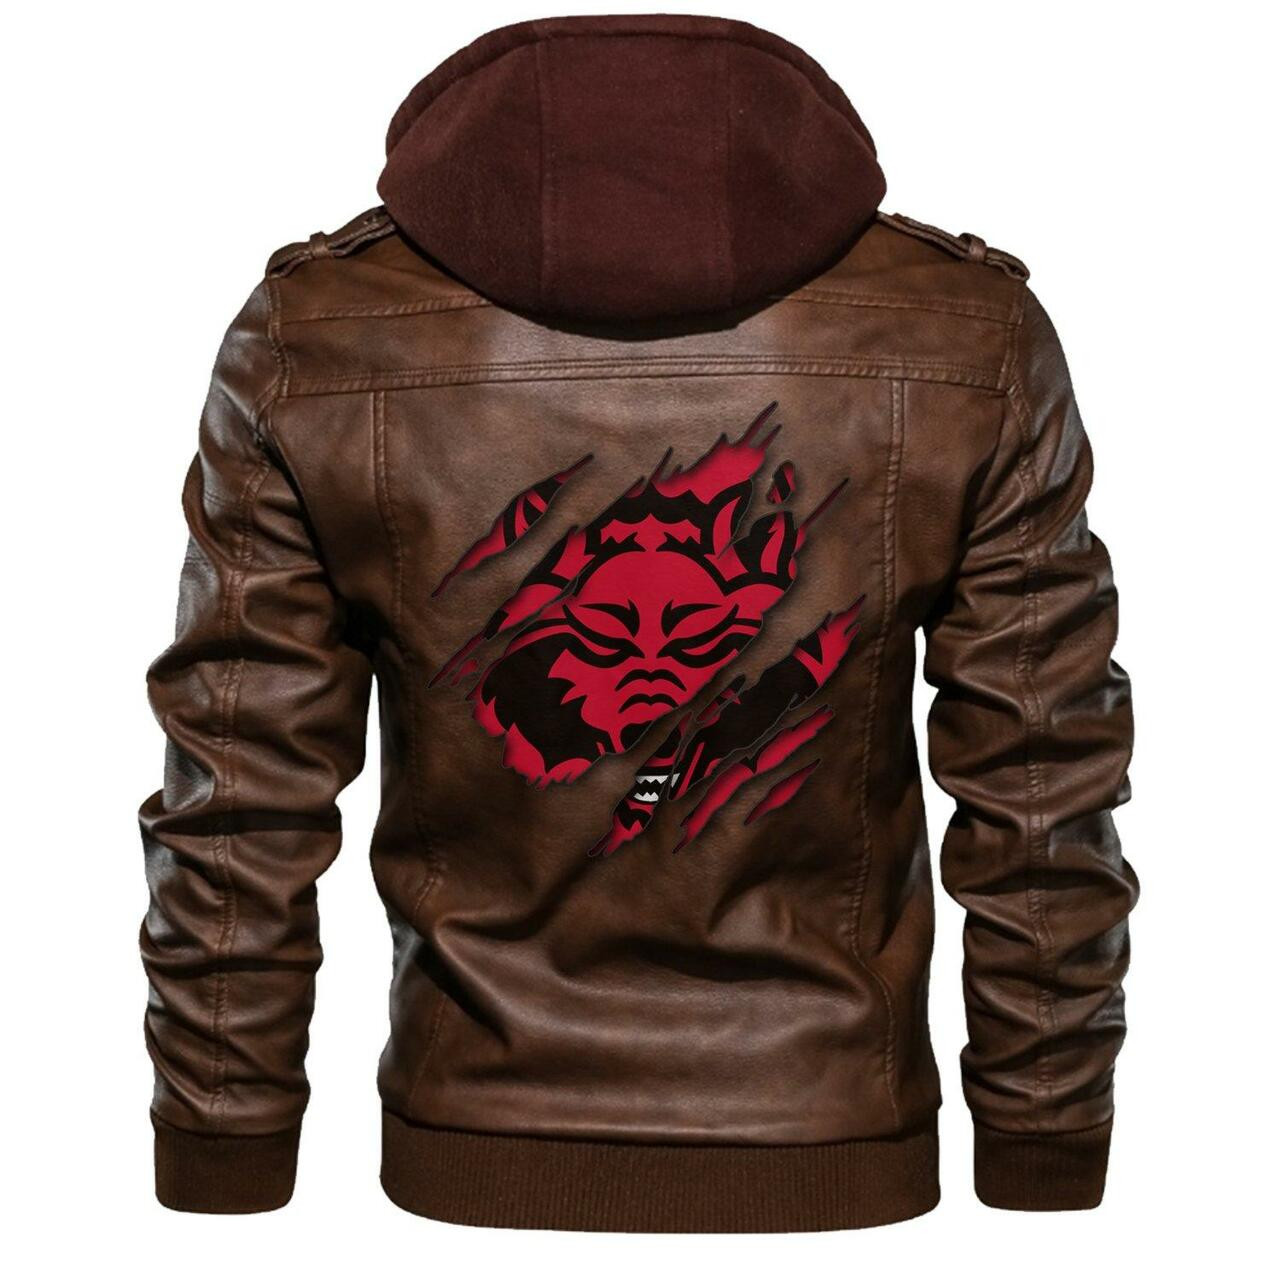 You can find a good leather jacket by access our website 86